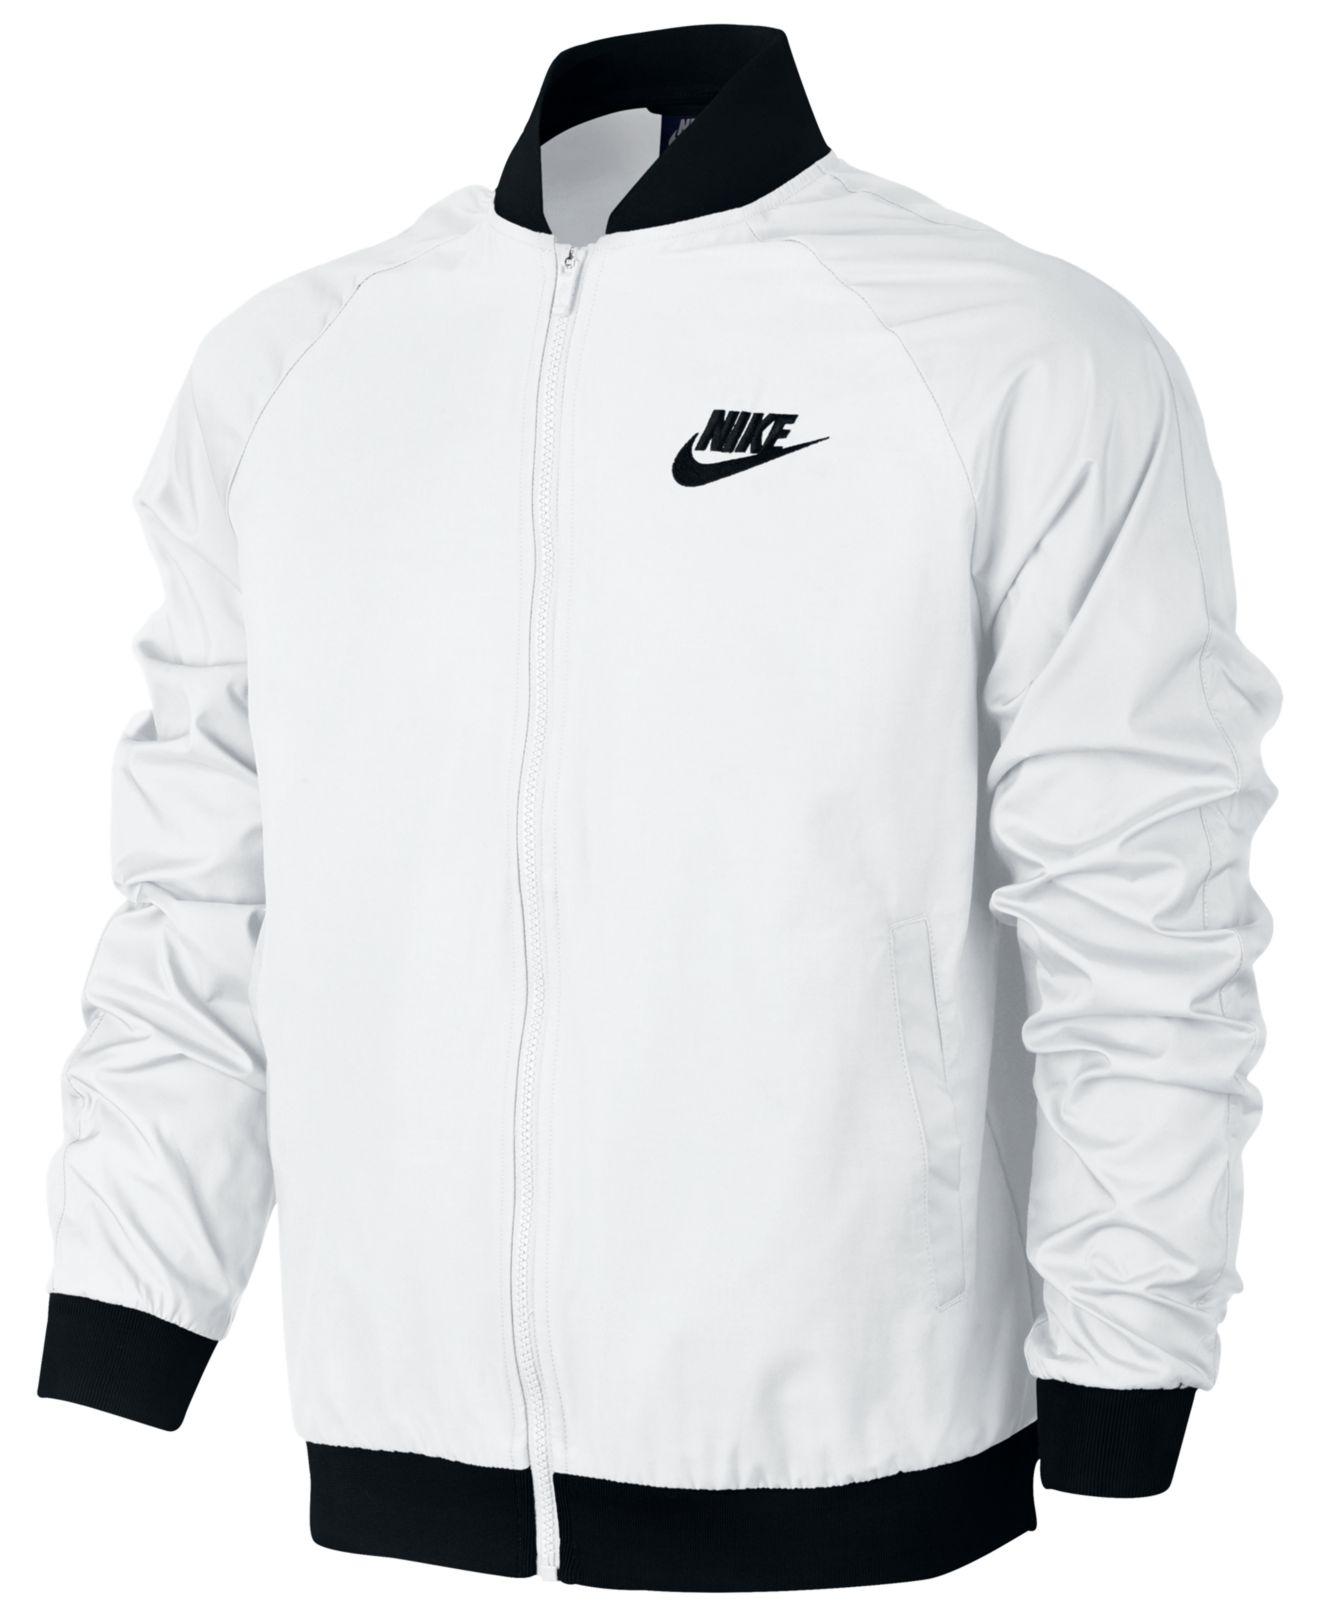 Nike Woven Players Bomber Jacket in 